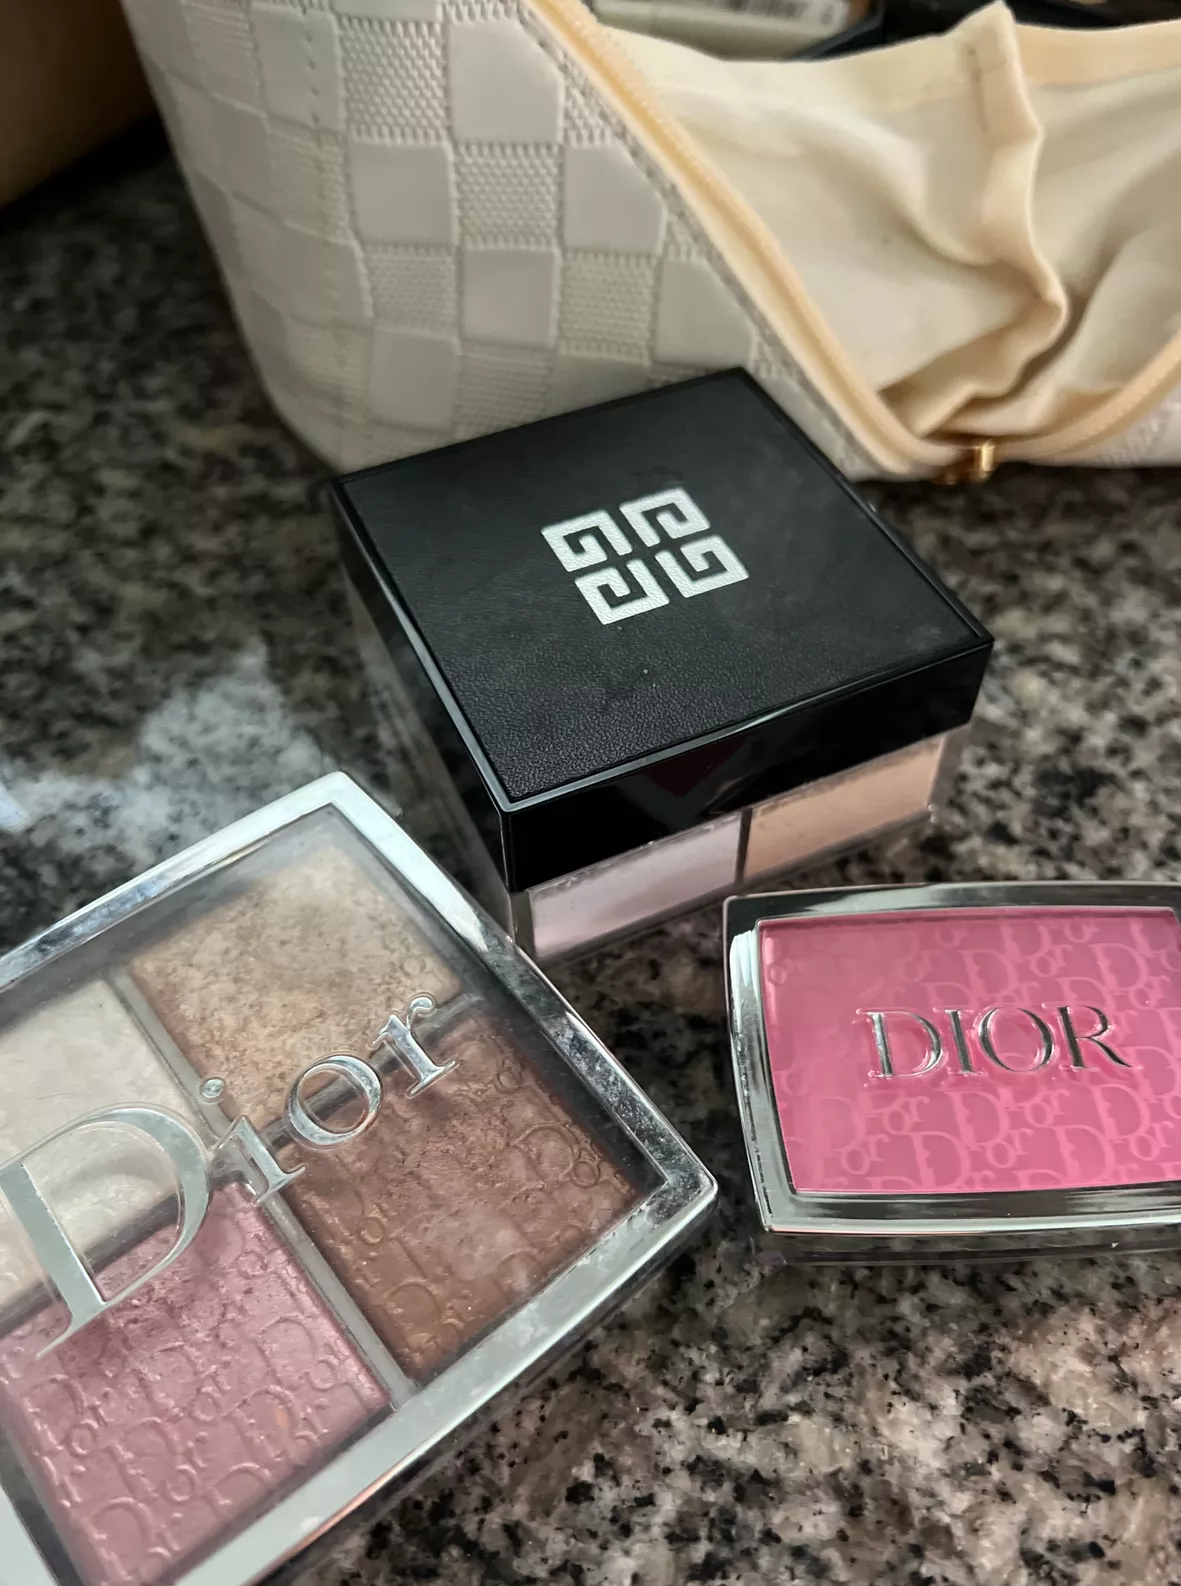 3 Makeup Products in a Dior Pouch